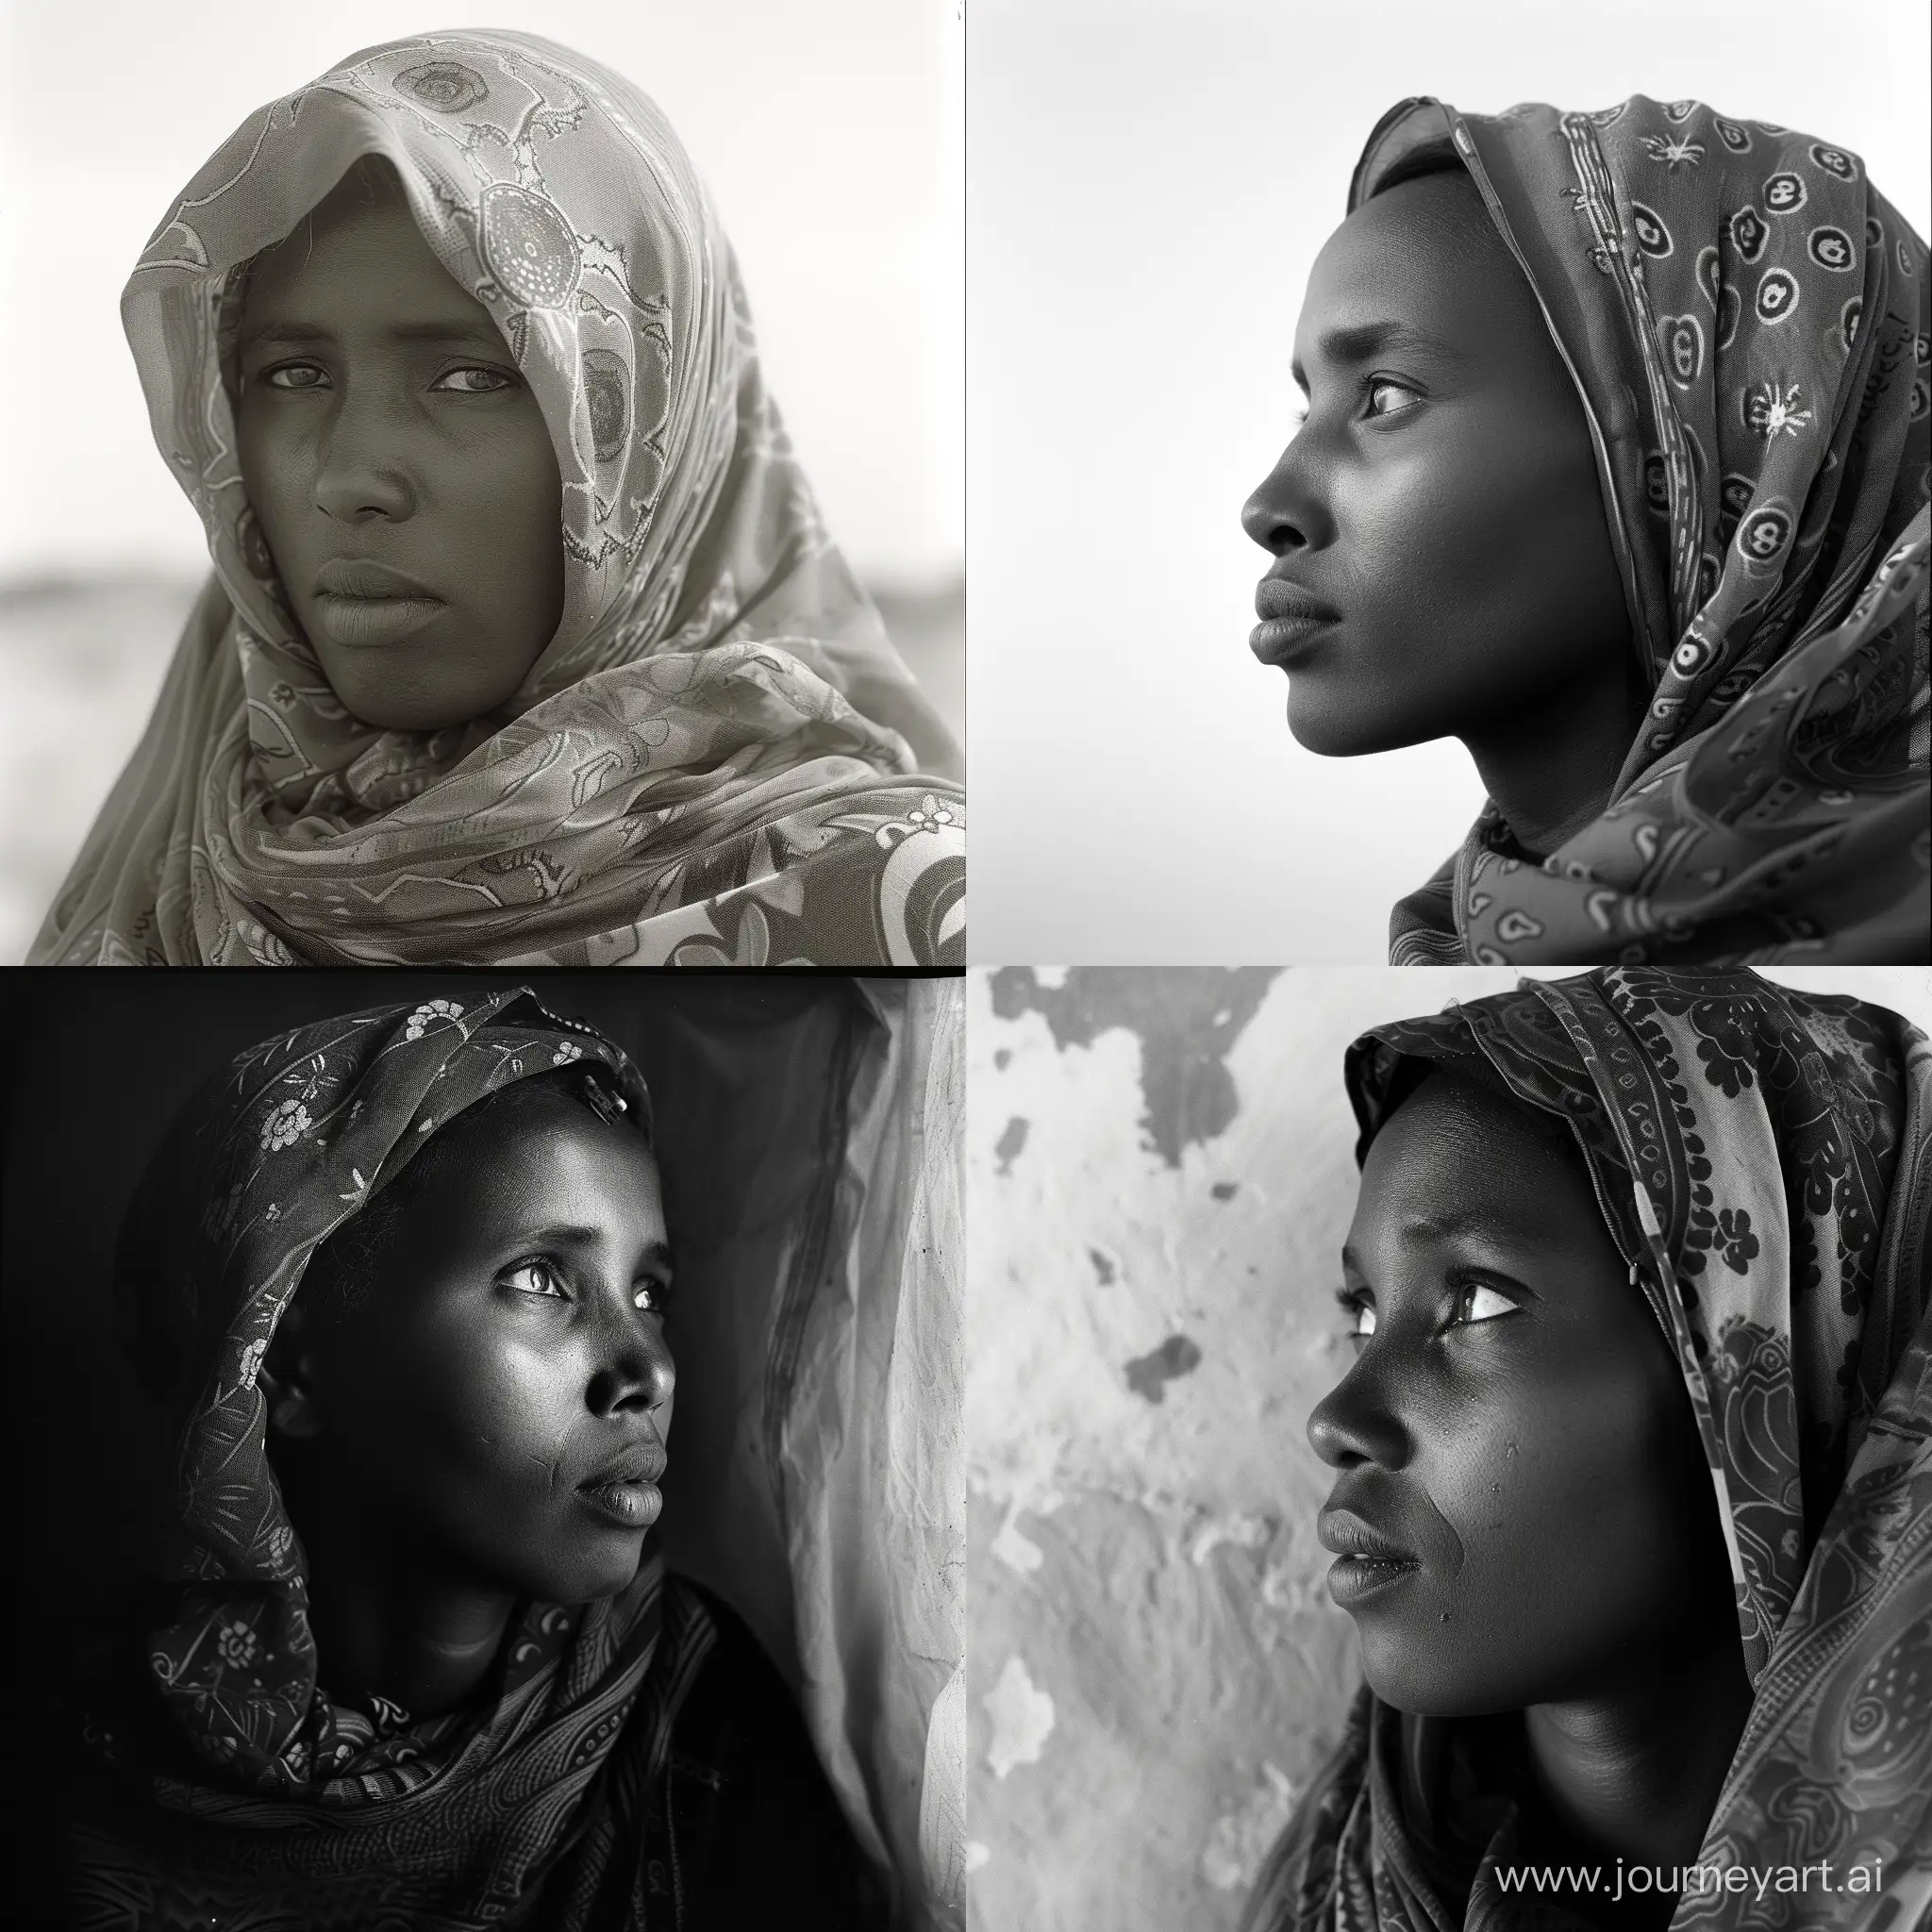 analog monochrome photo portrait of a Somali woman, shot with Ilford HP5+ 400by Cai Guo-Qiang::2

